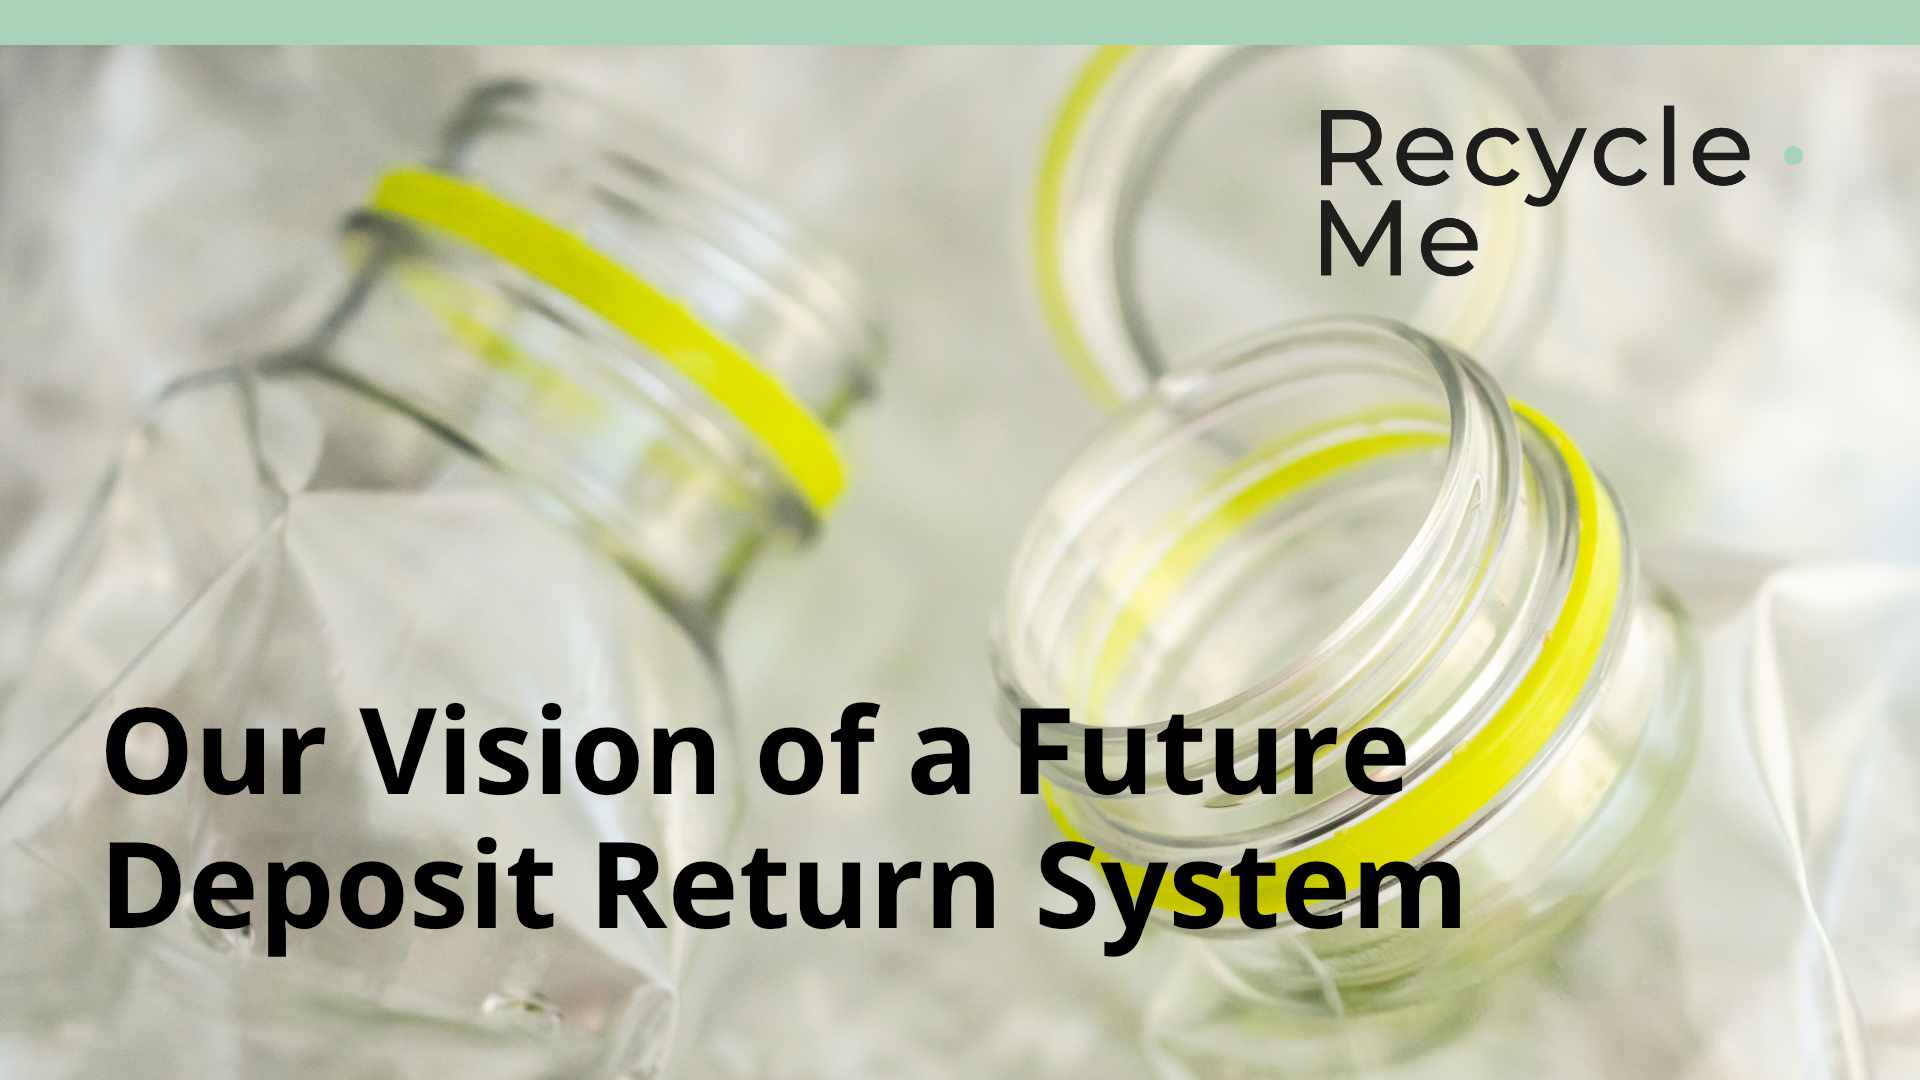 Our Vision of a Future Deposit Return System